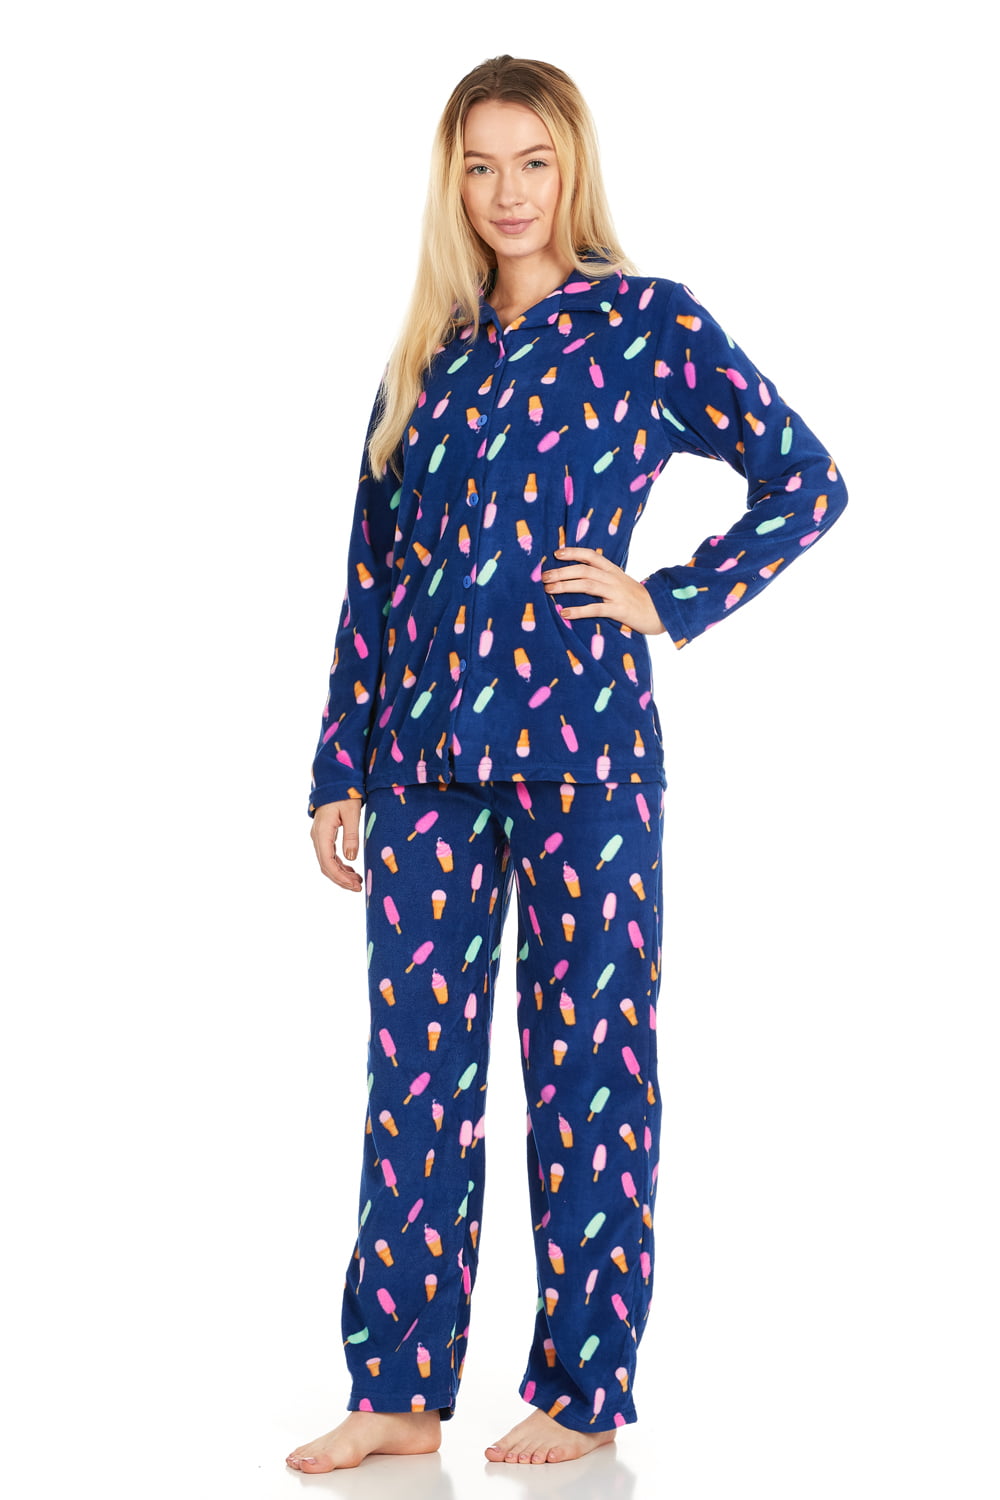 Unique Styles Asfoor 2 Piece Pajamas For Women Long Sleeve Cute